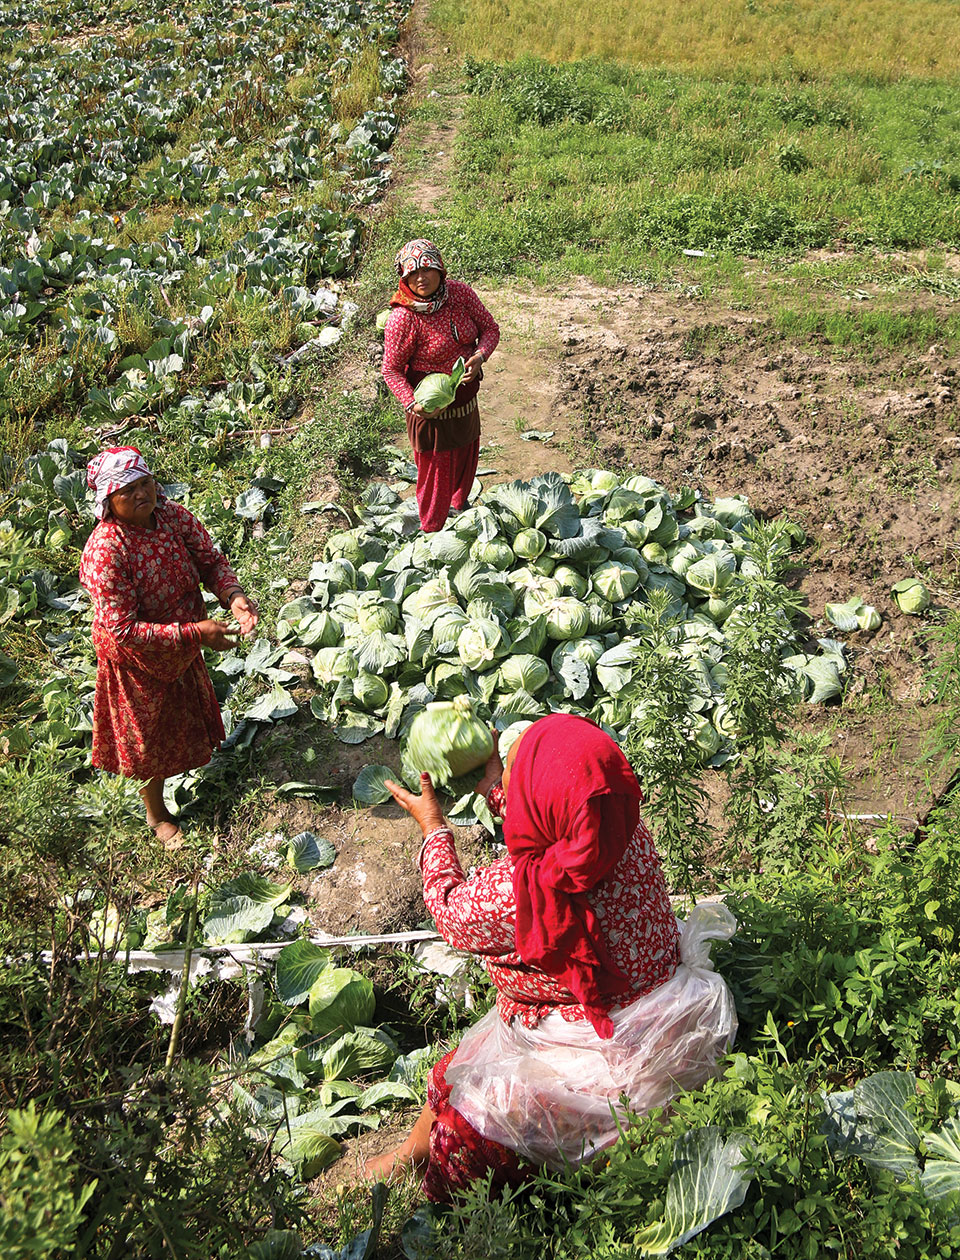 ‘Ktm Valley consumes 40% of all vegetables produced in the country’